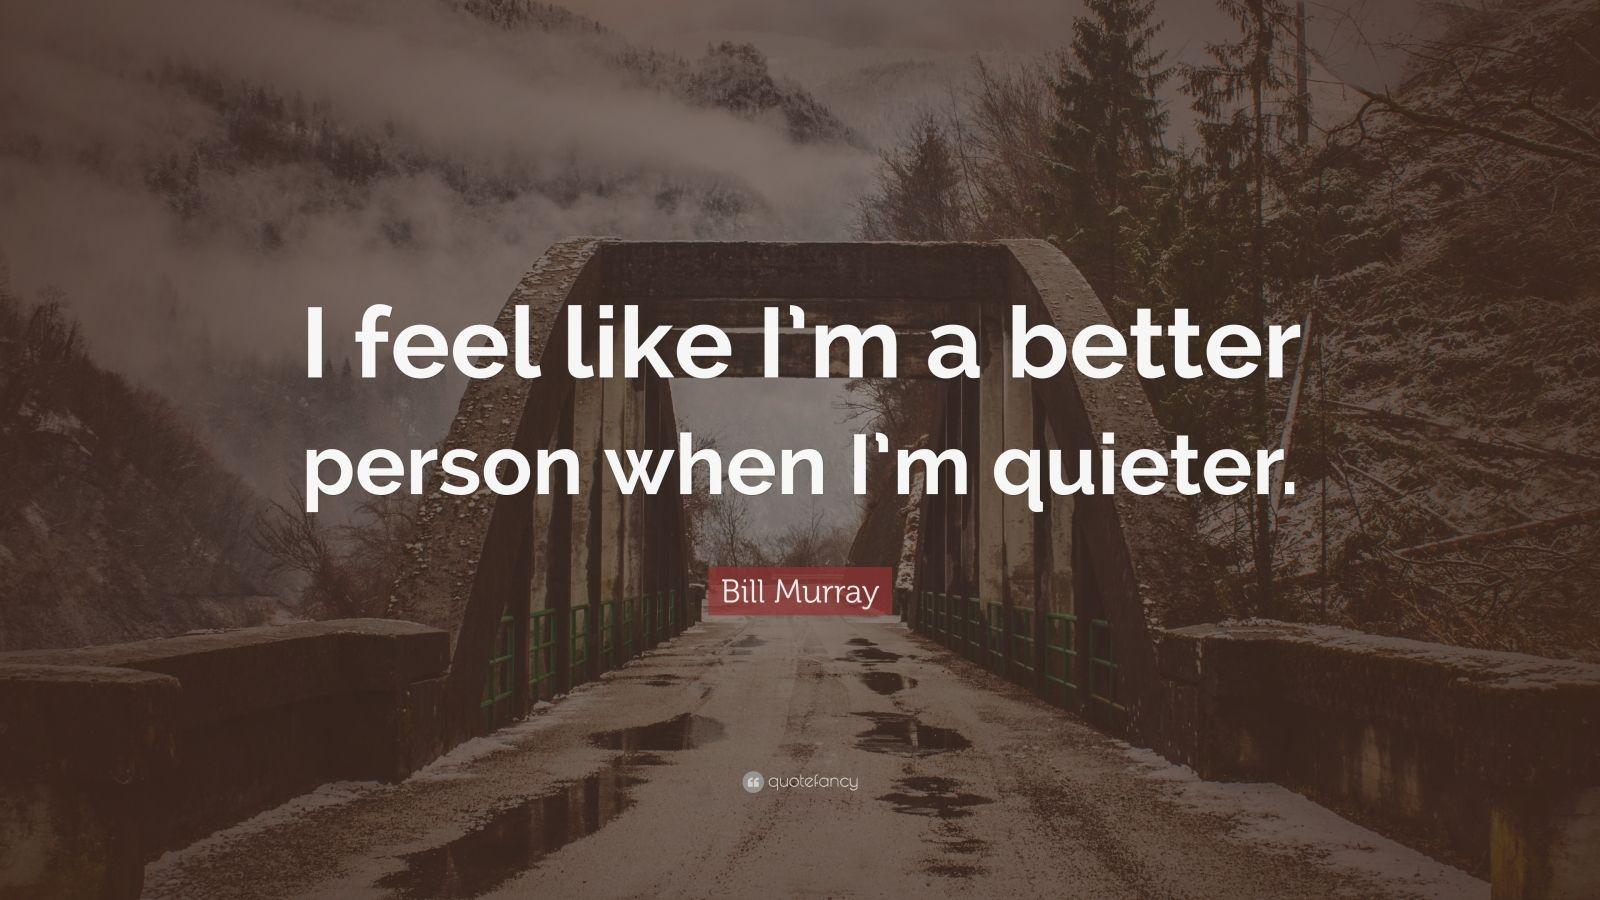 Bill Murray Quote: “I feel like I'm a better person when I'm